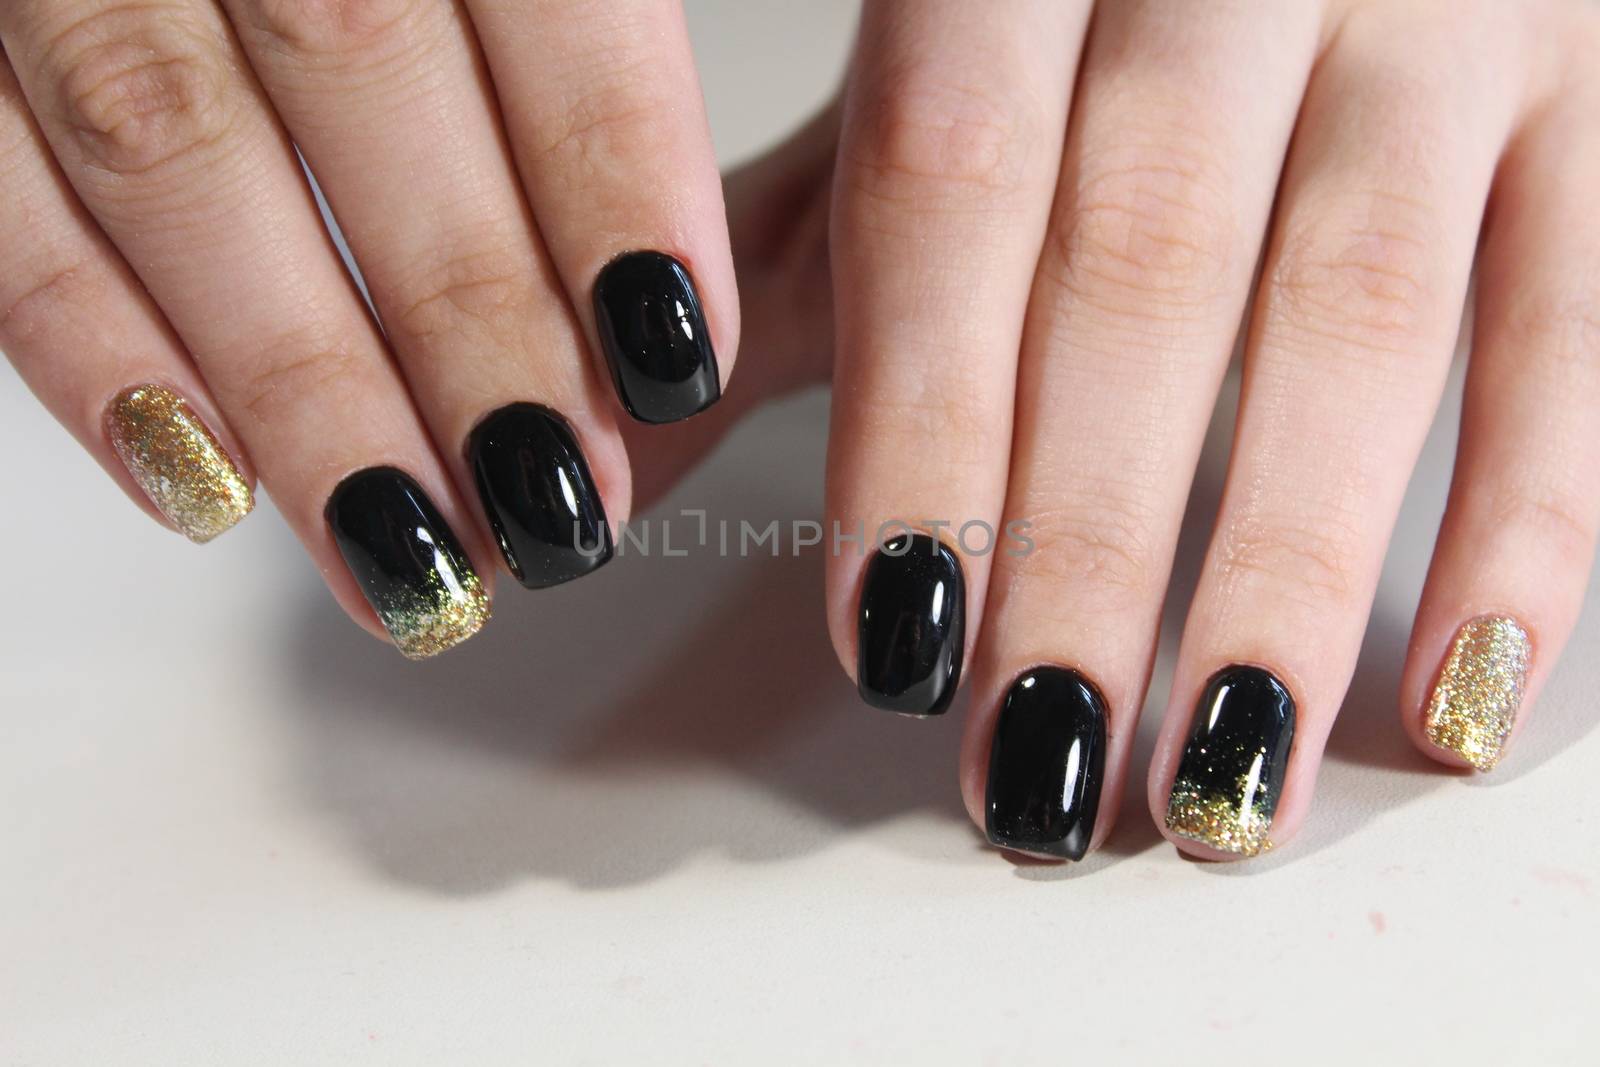 manicure design in black and gold color